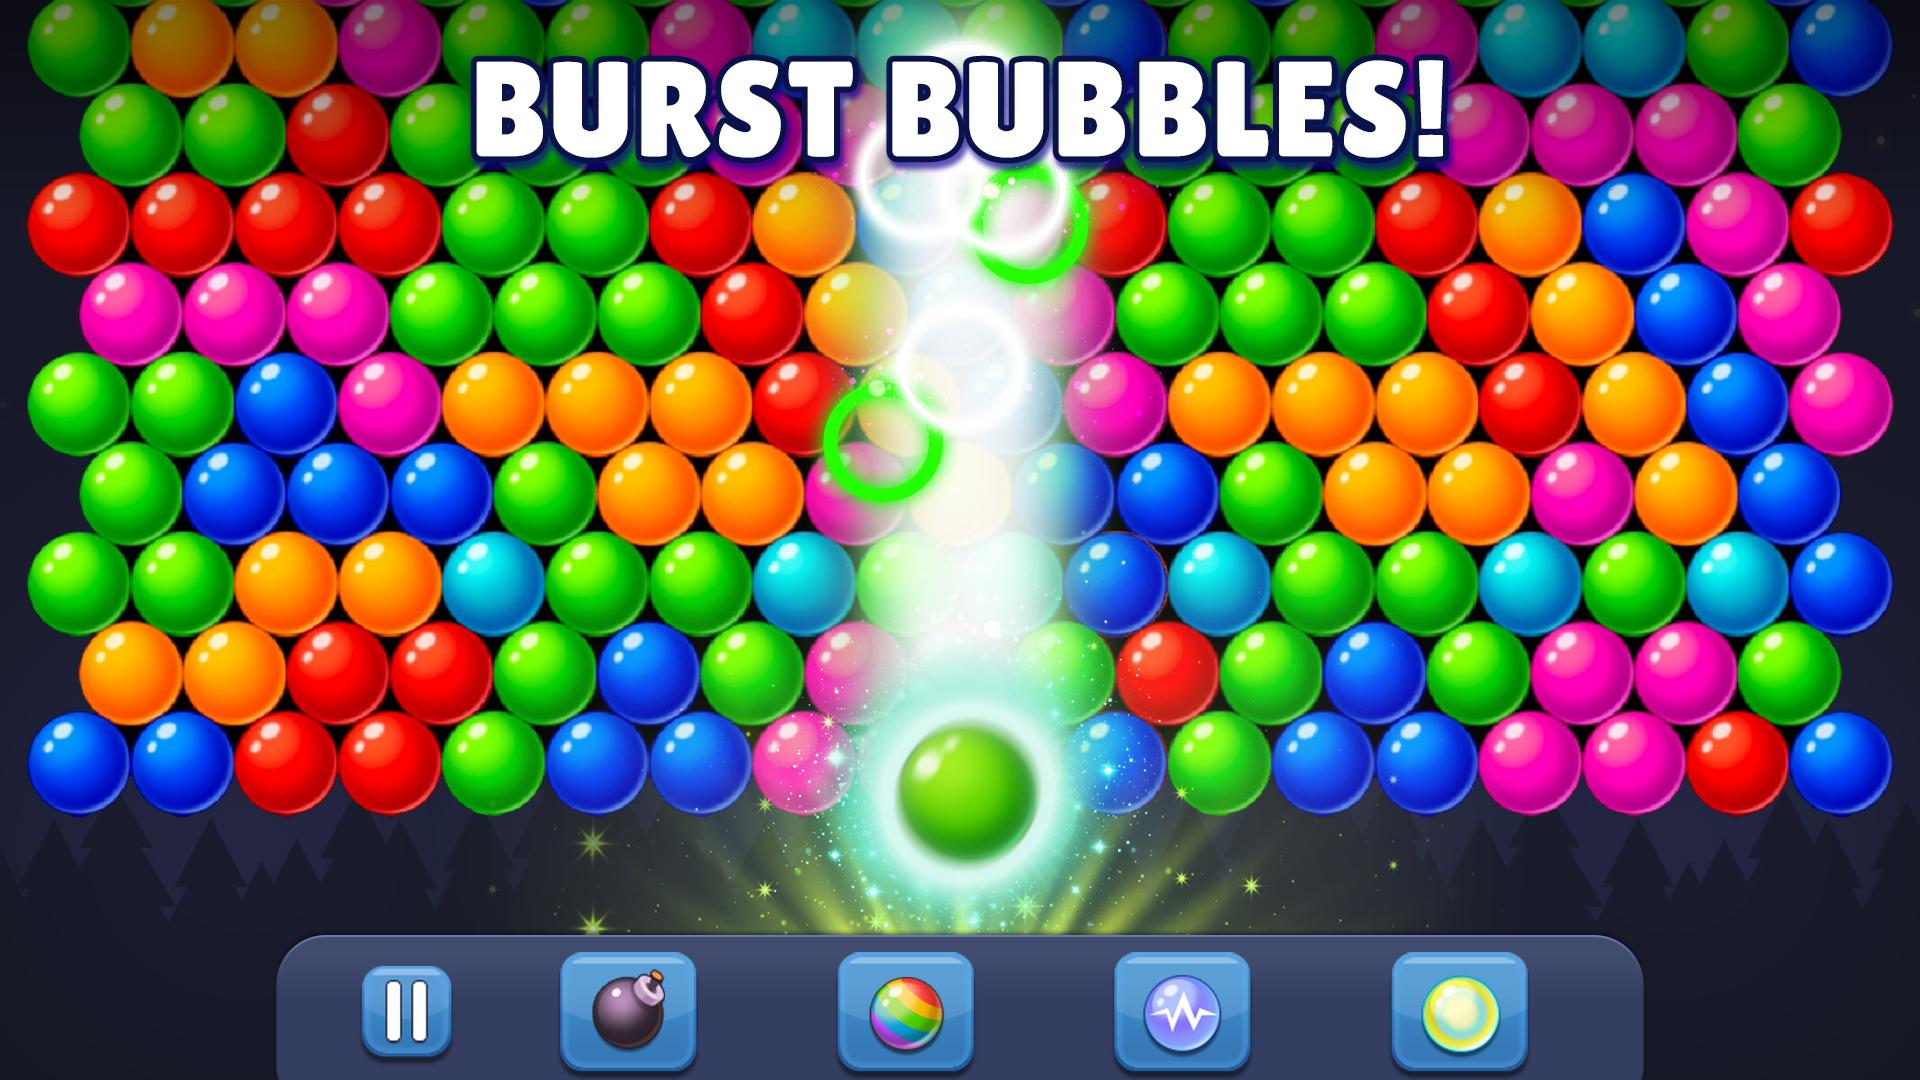 Bubble Pop! for Android - APK Download